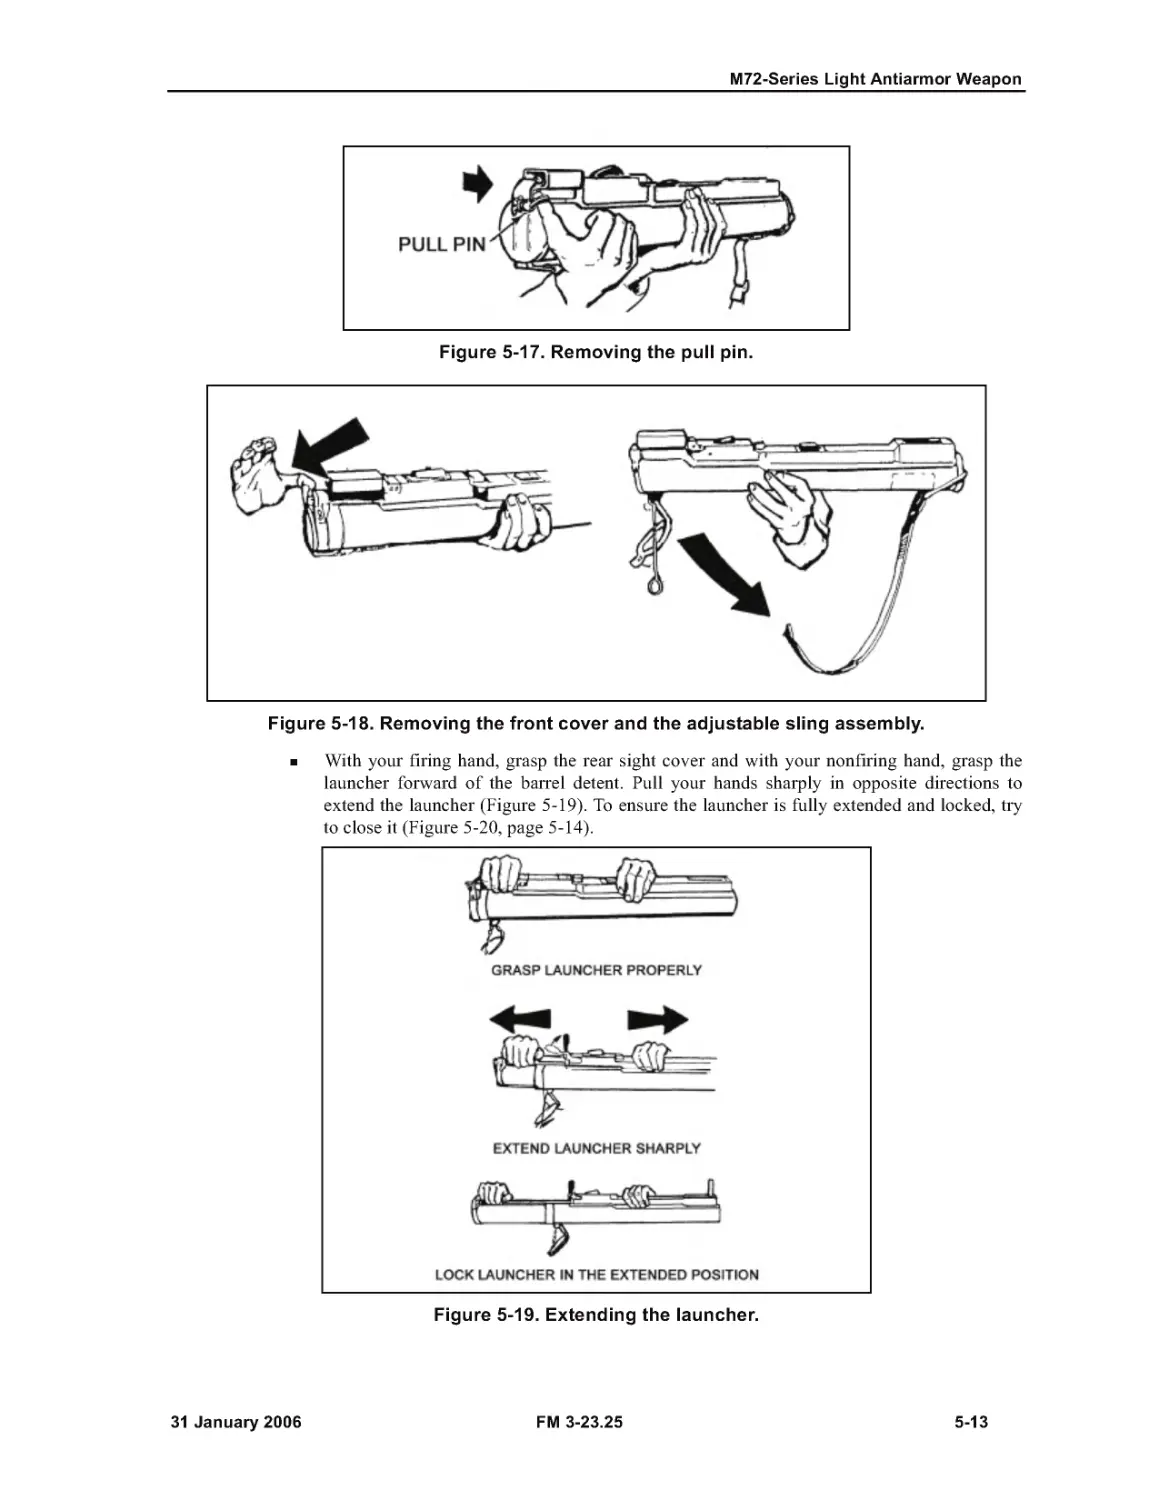 Figure 5-17. Removing the pull pin.
Figure 5-18. Removing the front cover and the adjustable sling assembly.
Figure 5-19. Extending the launcher.